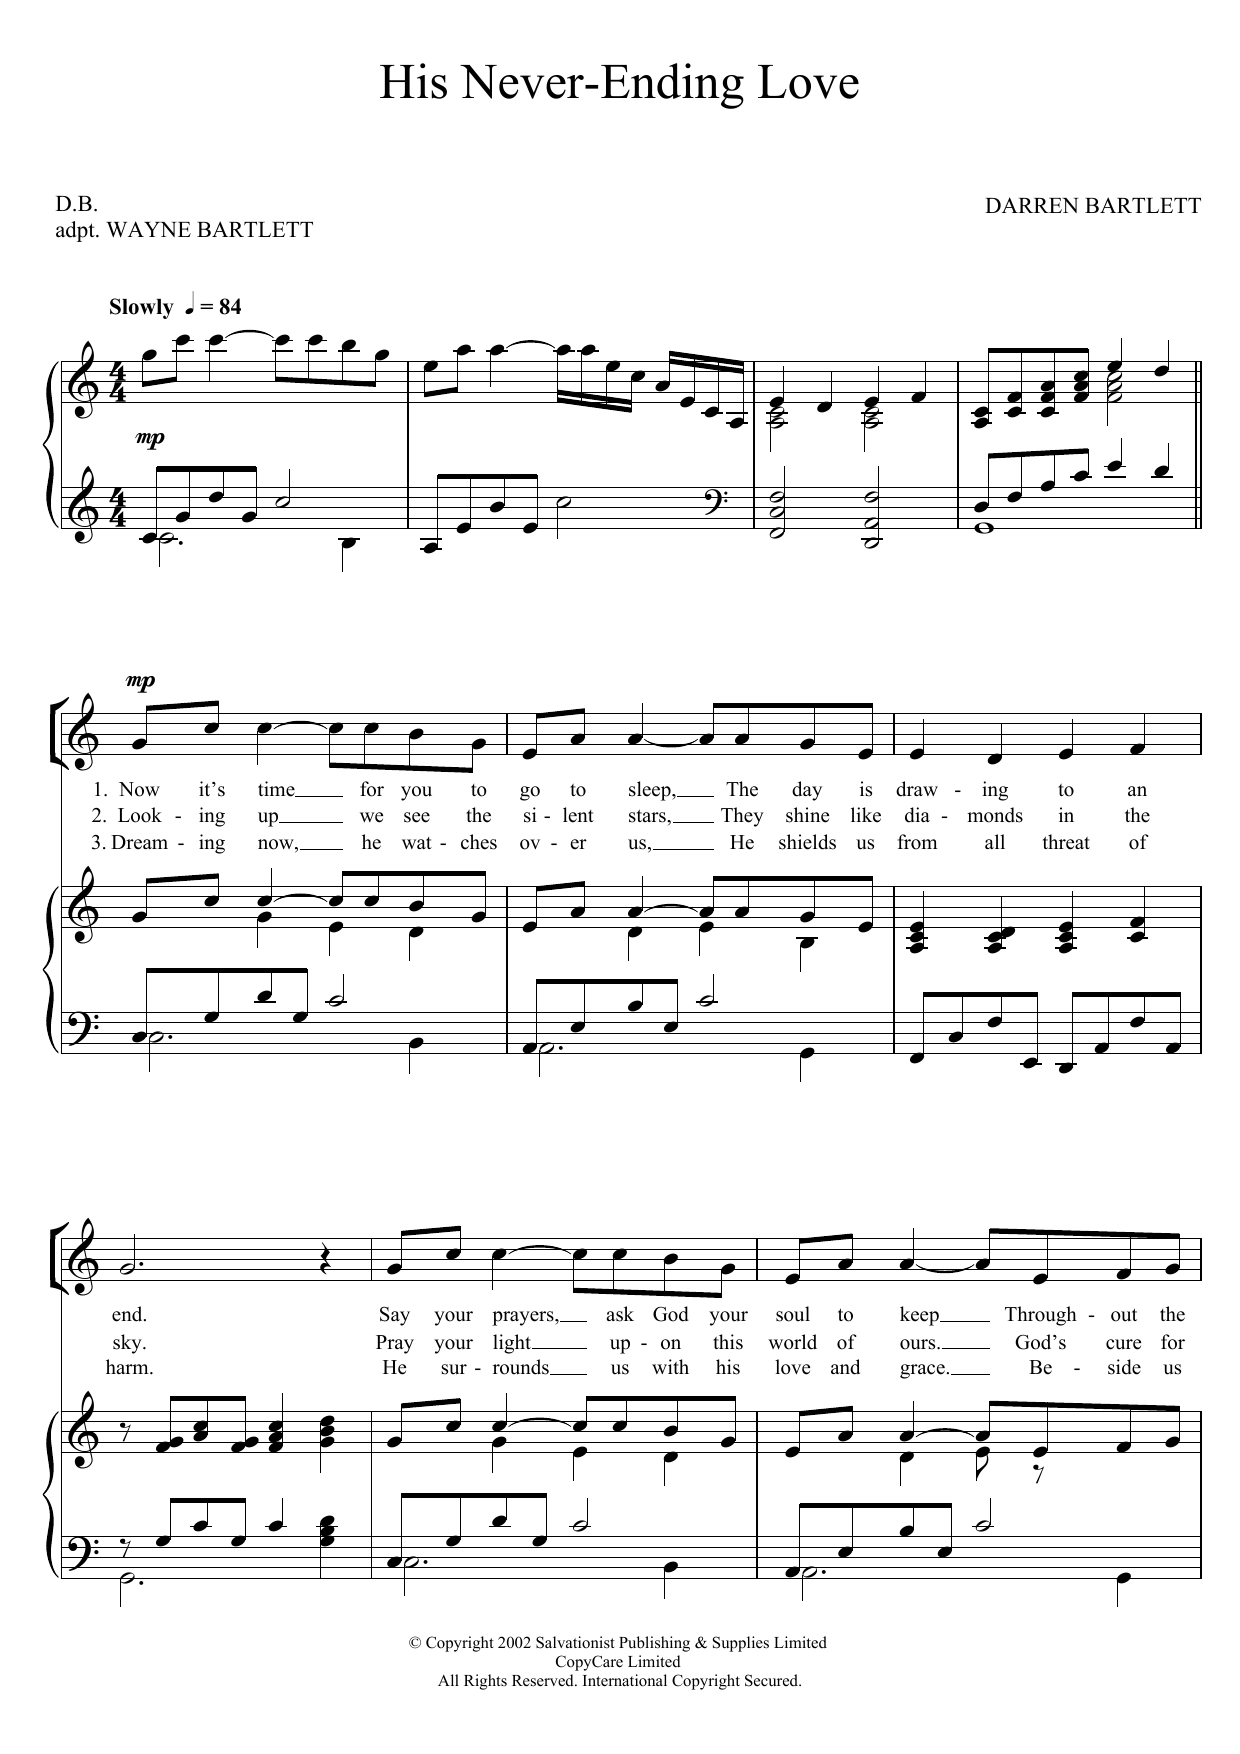 Download The Salvation Army His Never-Ending Love Sheet Music